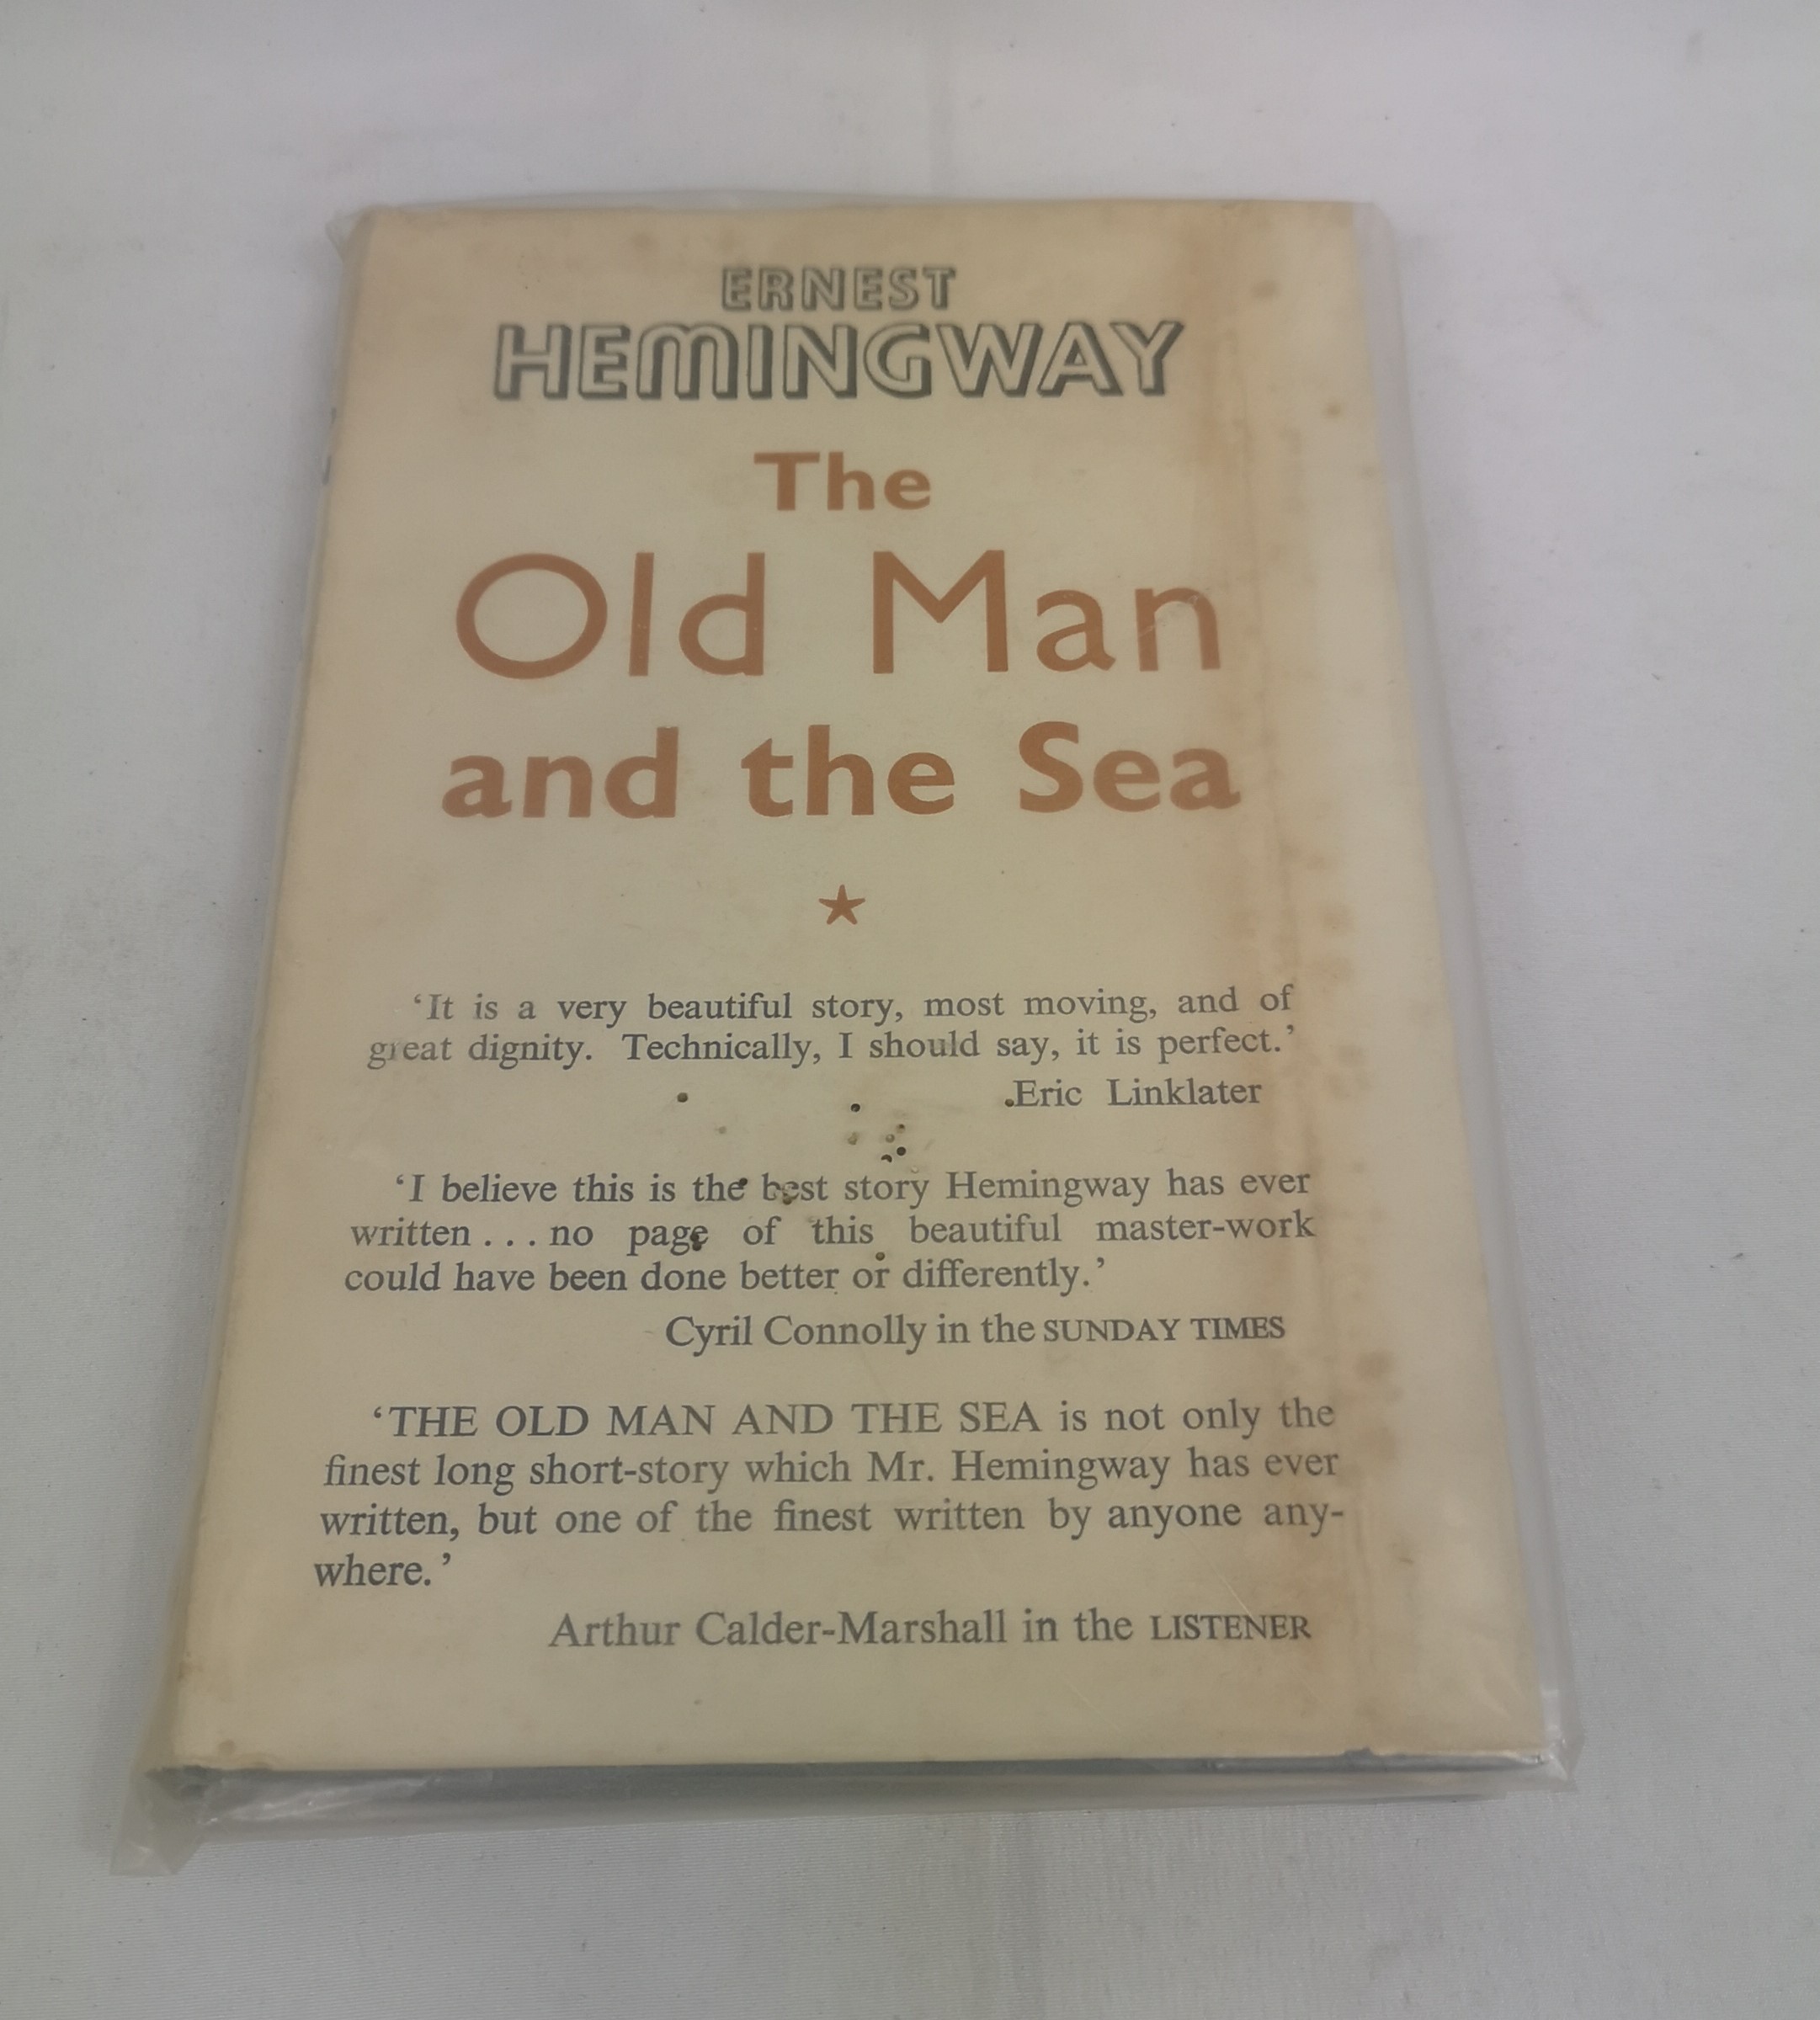 The Old Man and the Sea, published 1952